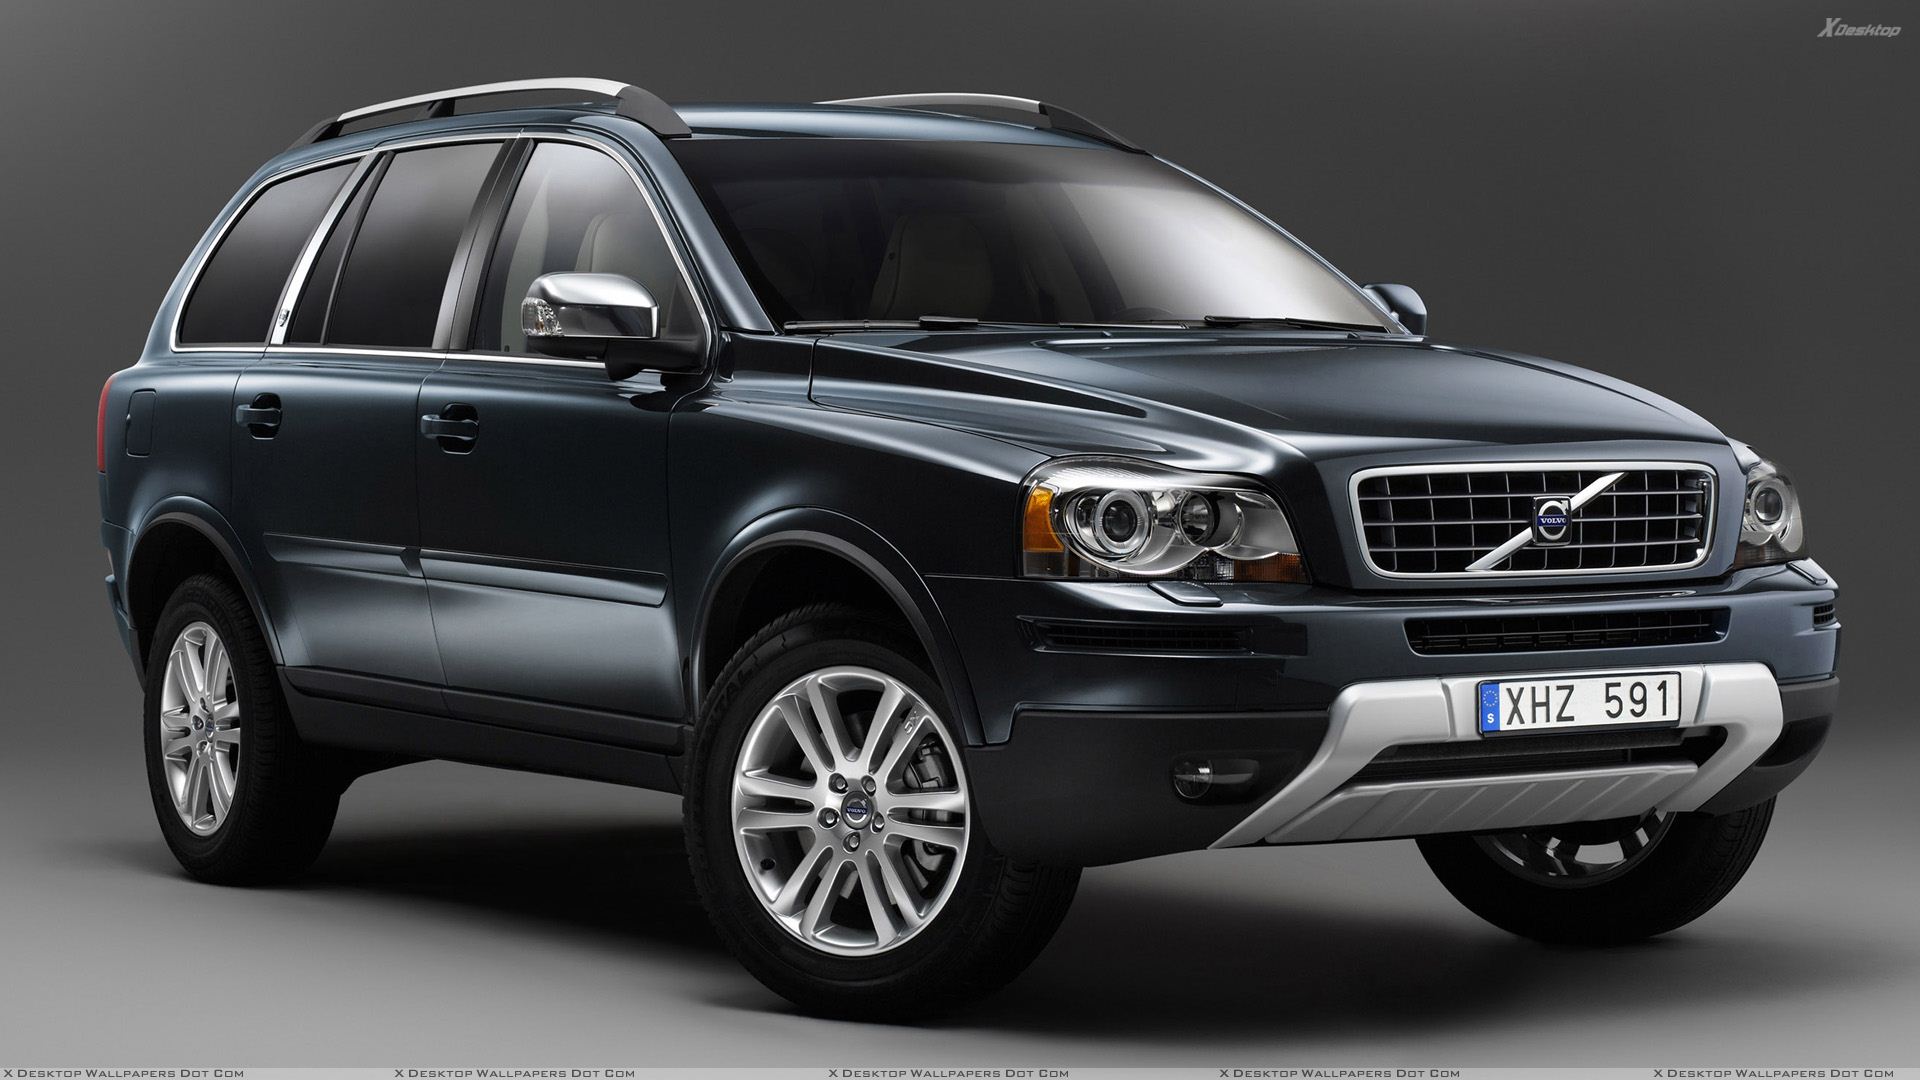 Volvo Xc90 Wallpaper Photos Image In HD